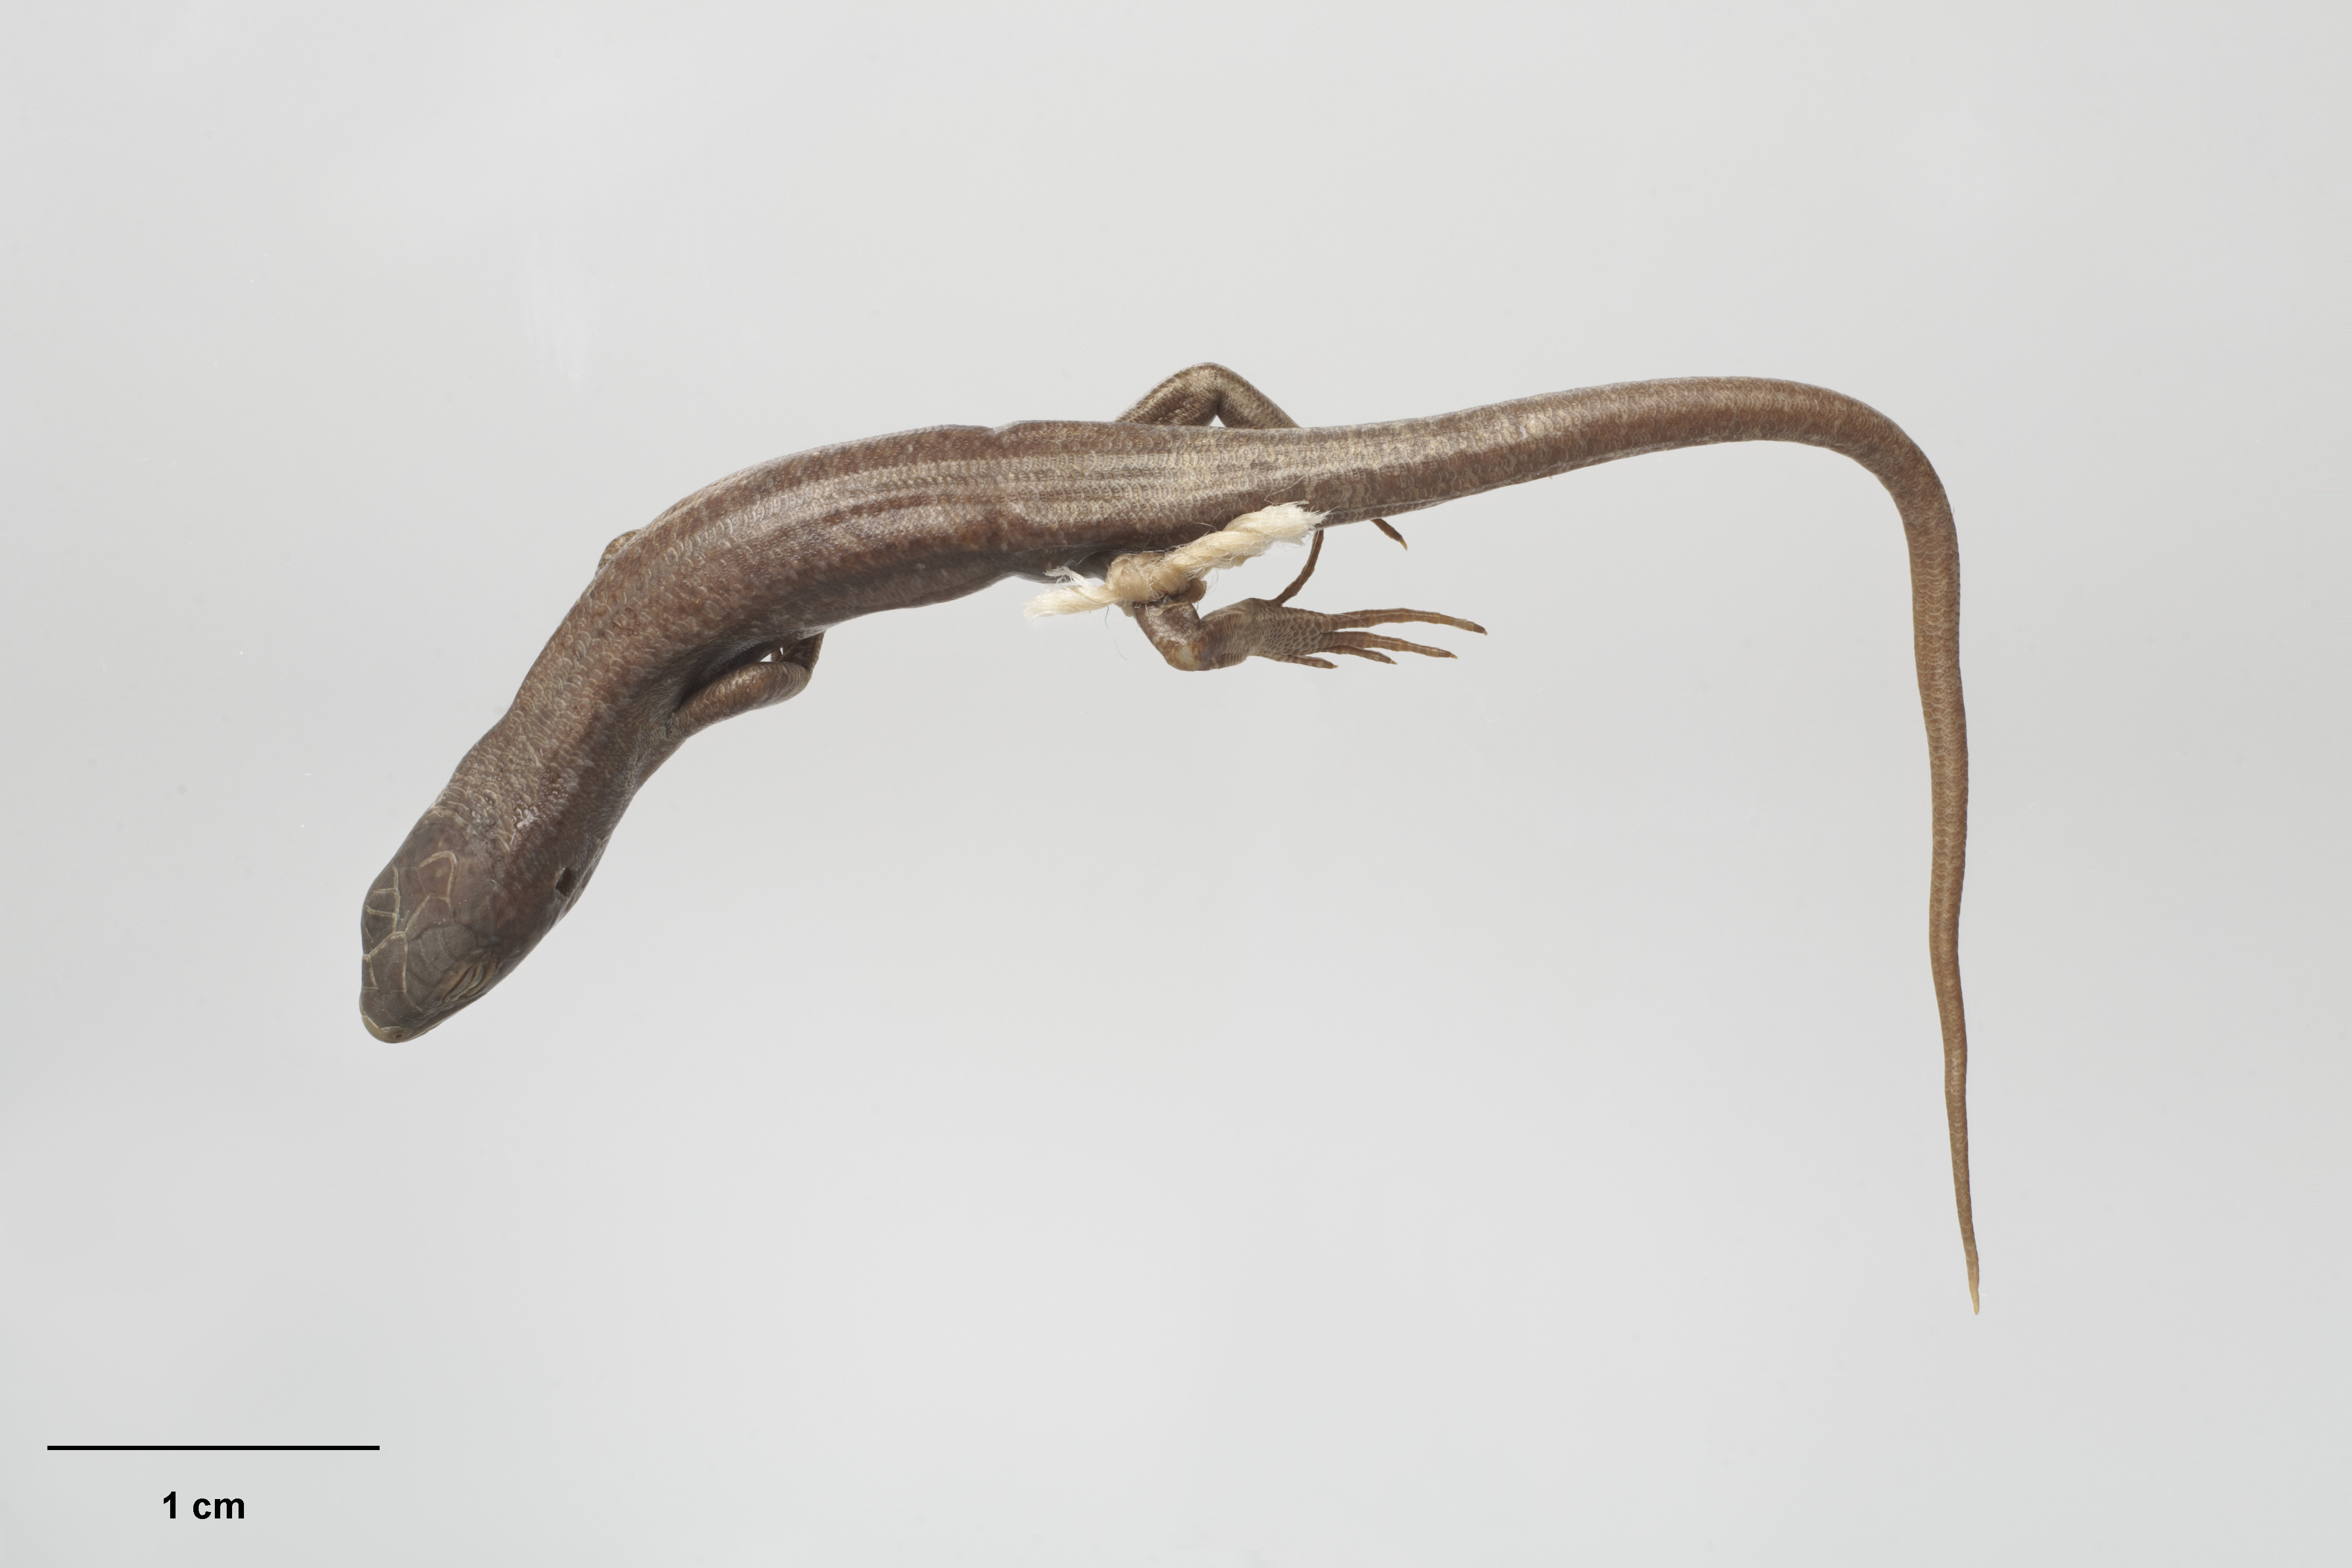 Long-toed Skink, Oligosoma longipes Patterson, 1997, collected 08 Feb 1972, Alma River, 3 miles E of Tarndale, New Zealand. Gift of Landcare Research – Manaaki Whenua, 2012. CC BY-NC-ND licence. Te Papa (RE.004973)